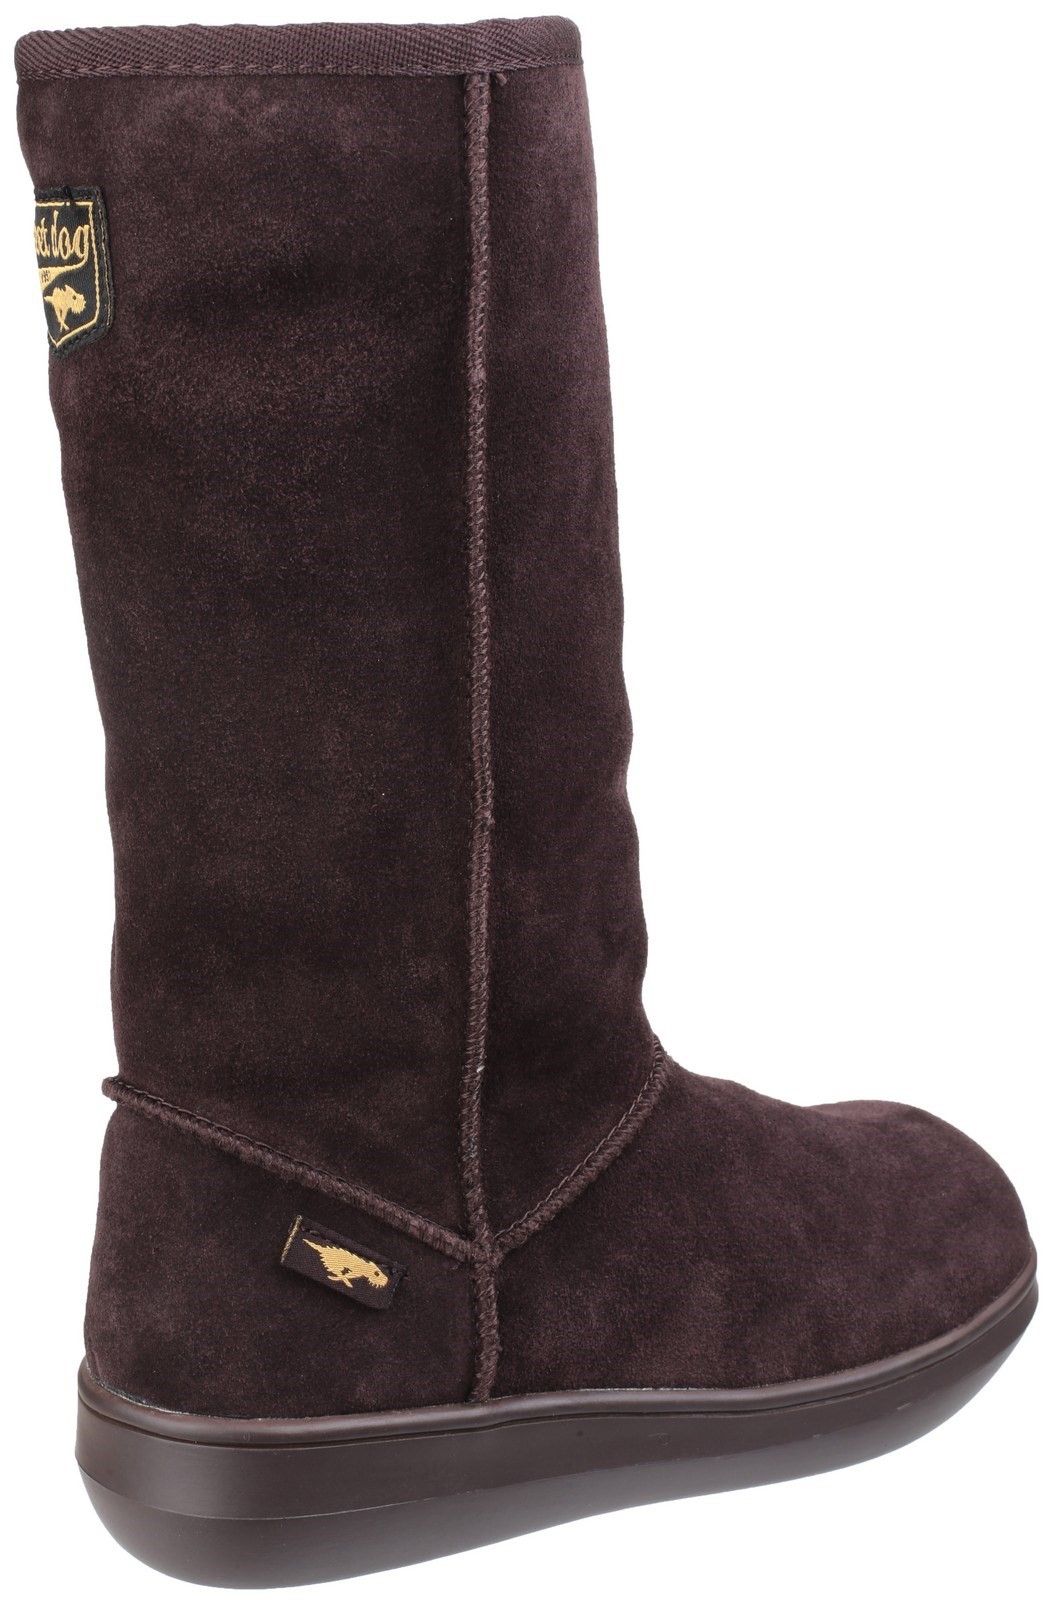 Sugar Daddy - the boot we all love! Soft and stylish suede upper that makes this boot good to look at, whilst a faux shearling lining adds great comfort whilst being worn. This pull on boot style is always a hit each winter. Stylish suede upper. 
Faux shearling, textile lining for a soft touch when being worn. 
Durable and flexible rubber sole.